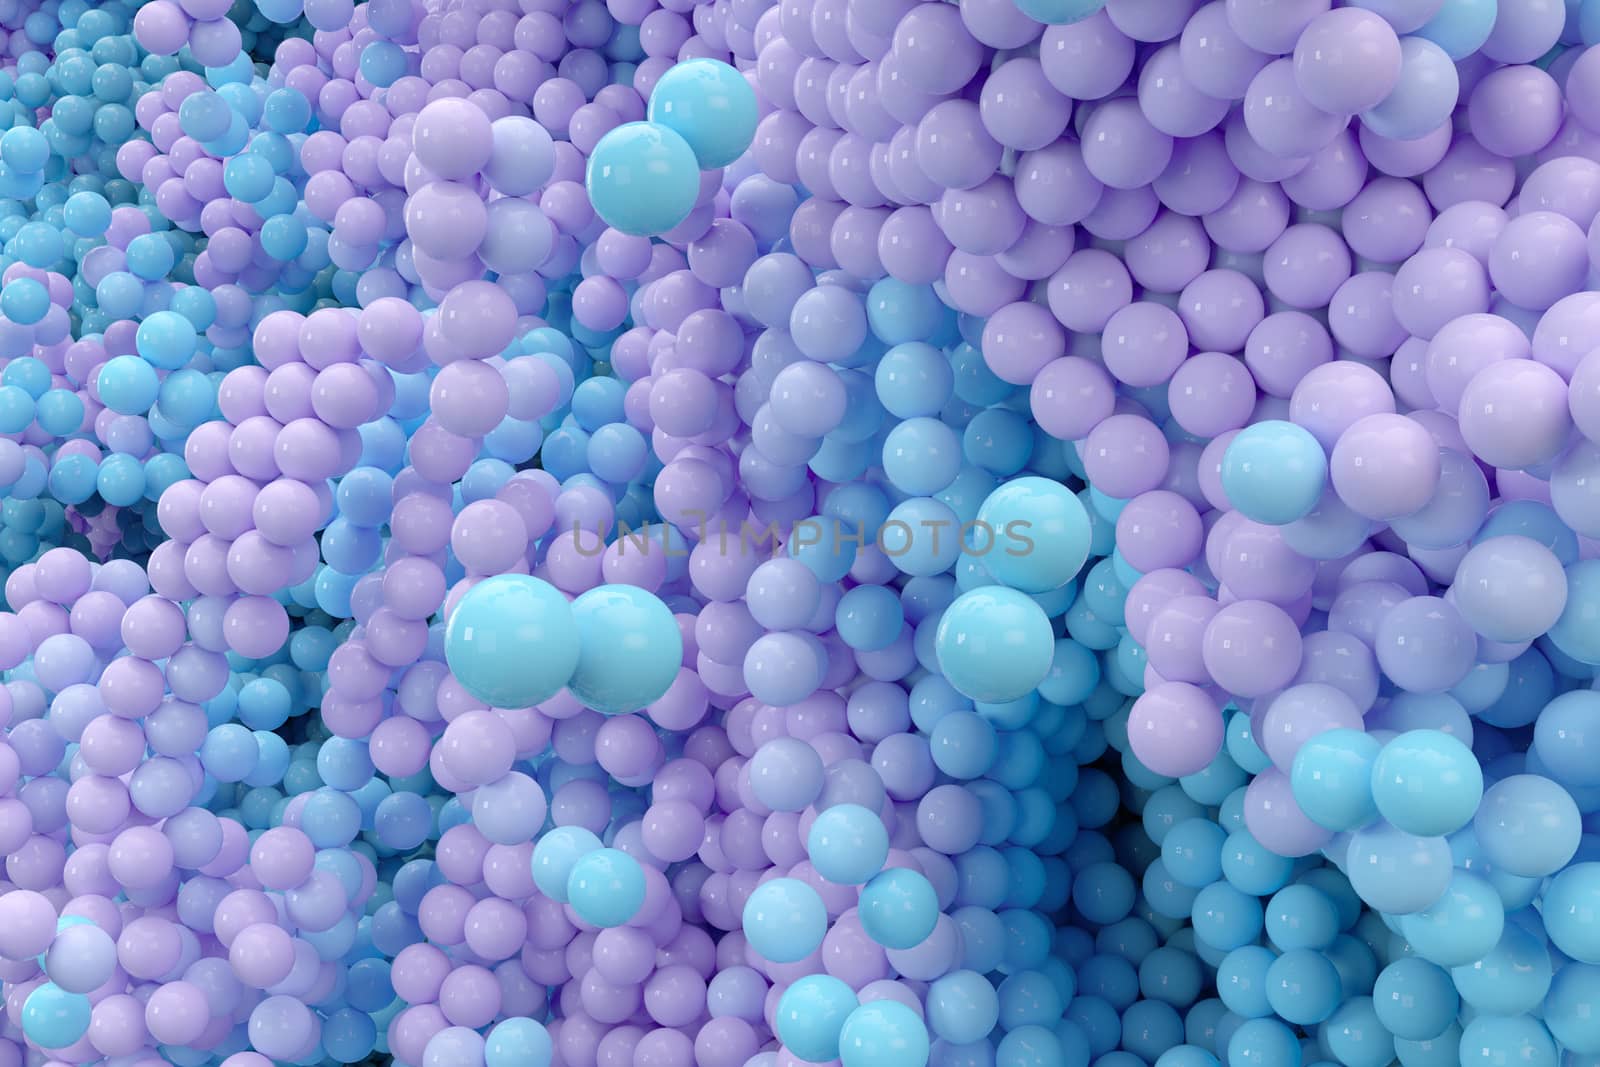 Glossy balls gather together, abstract background, 3d rendering. by vinkfan